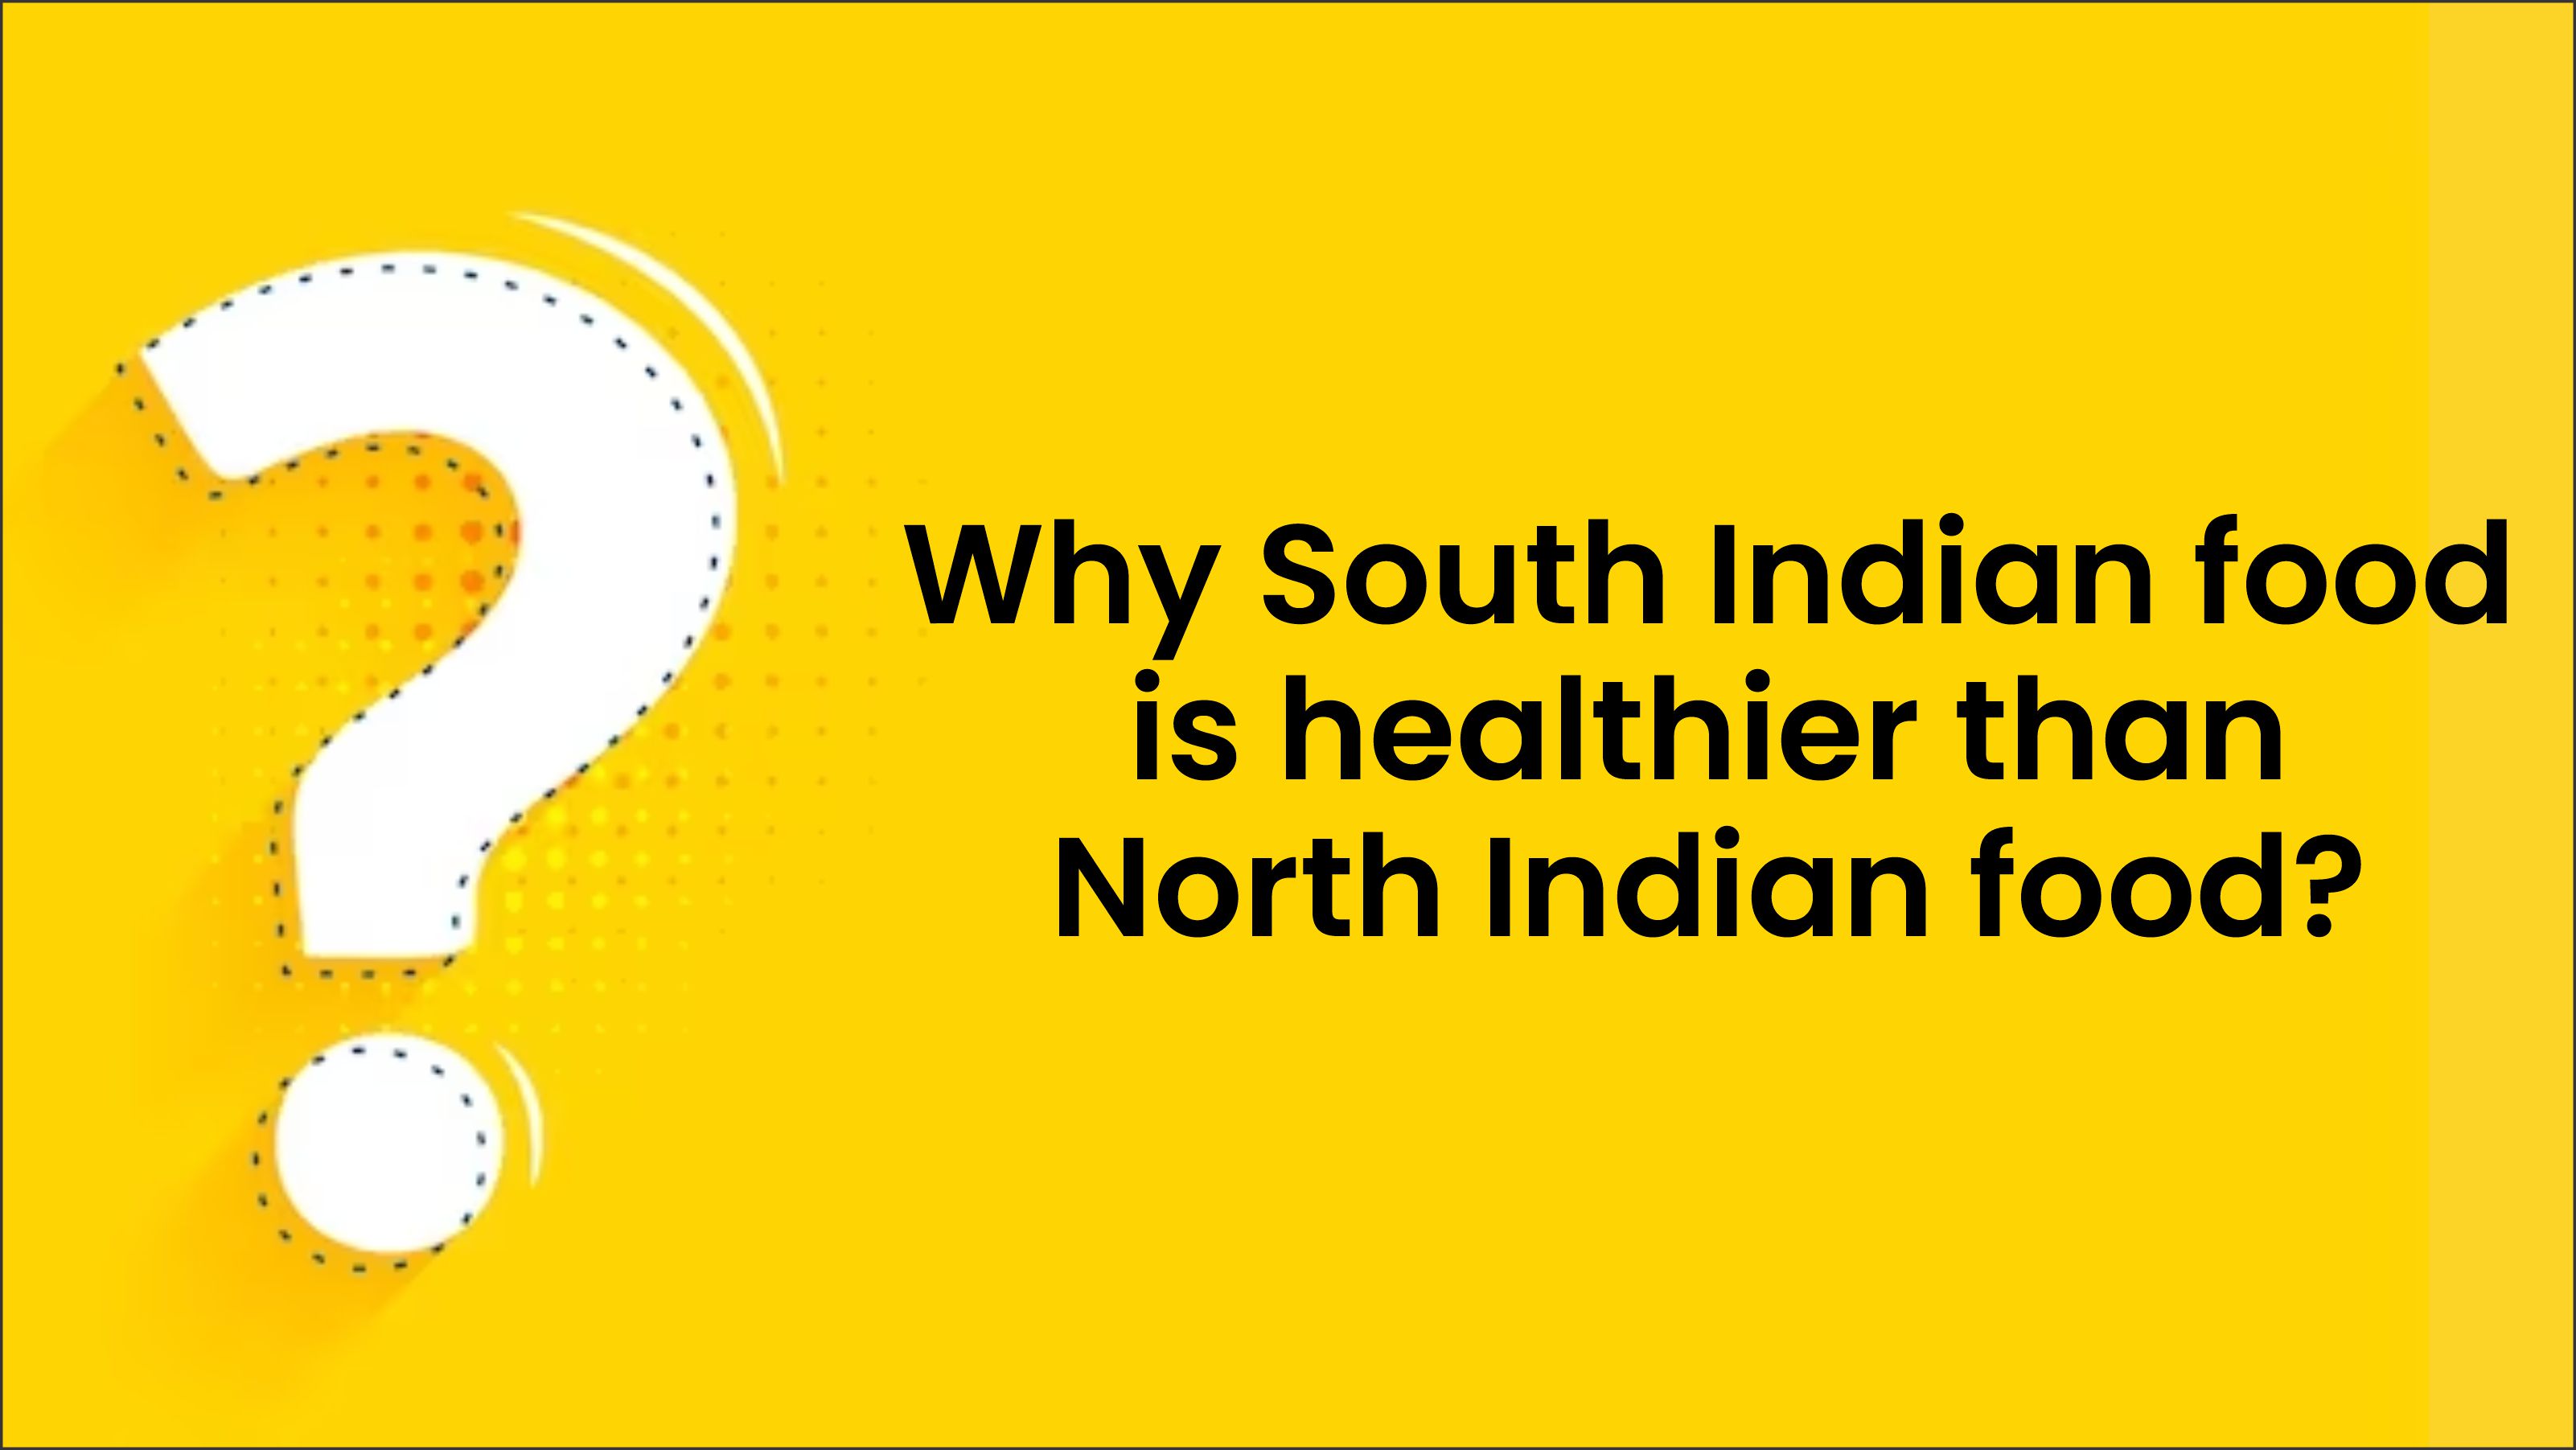 Why South Indian food is healthier than North Indian food?